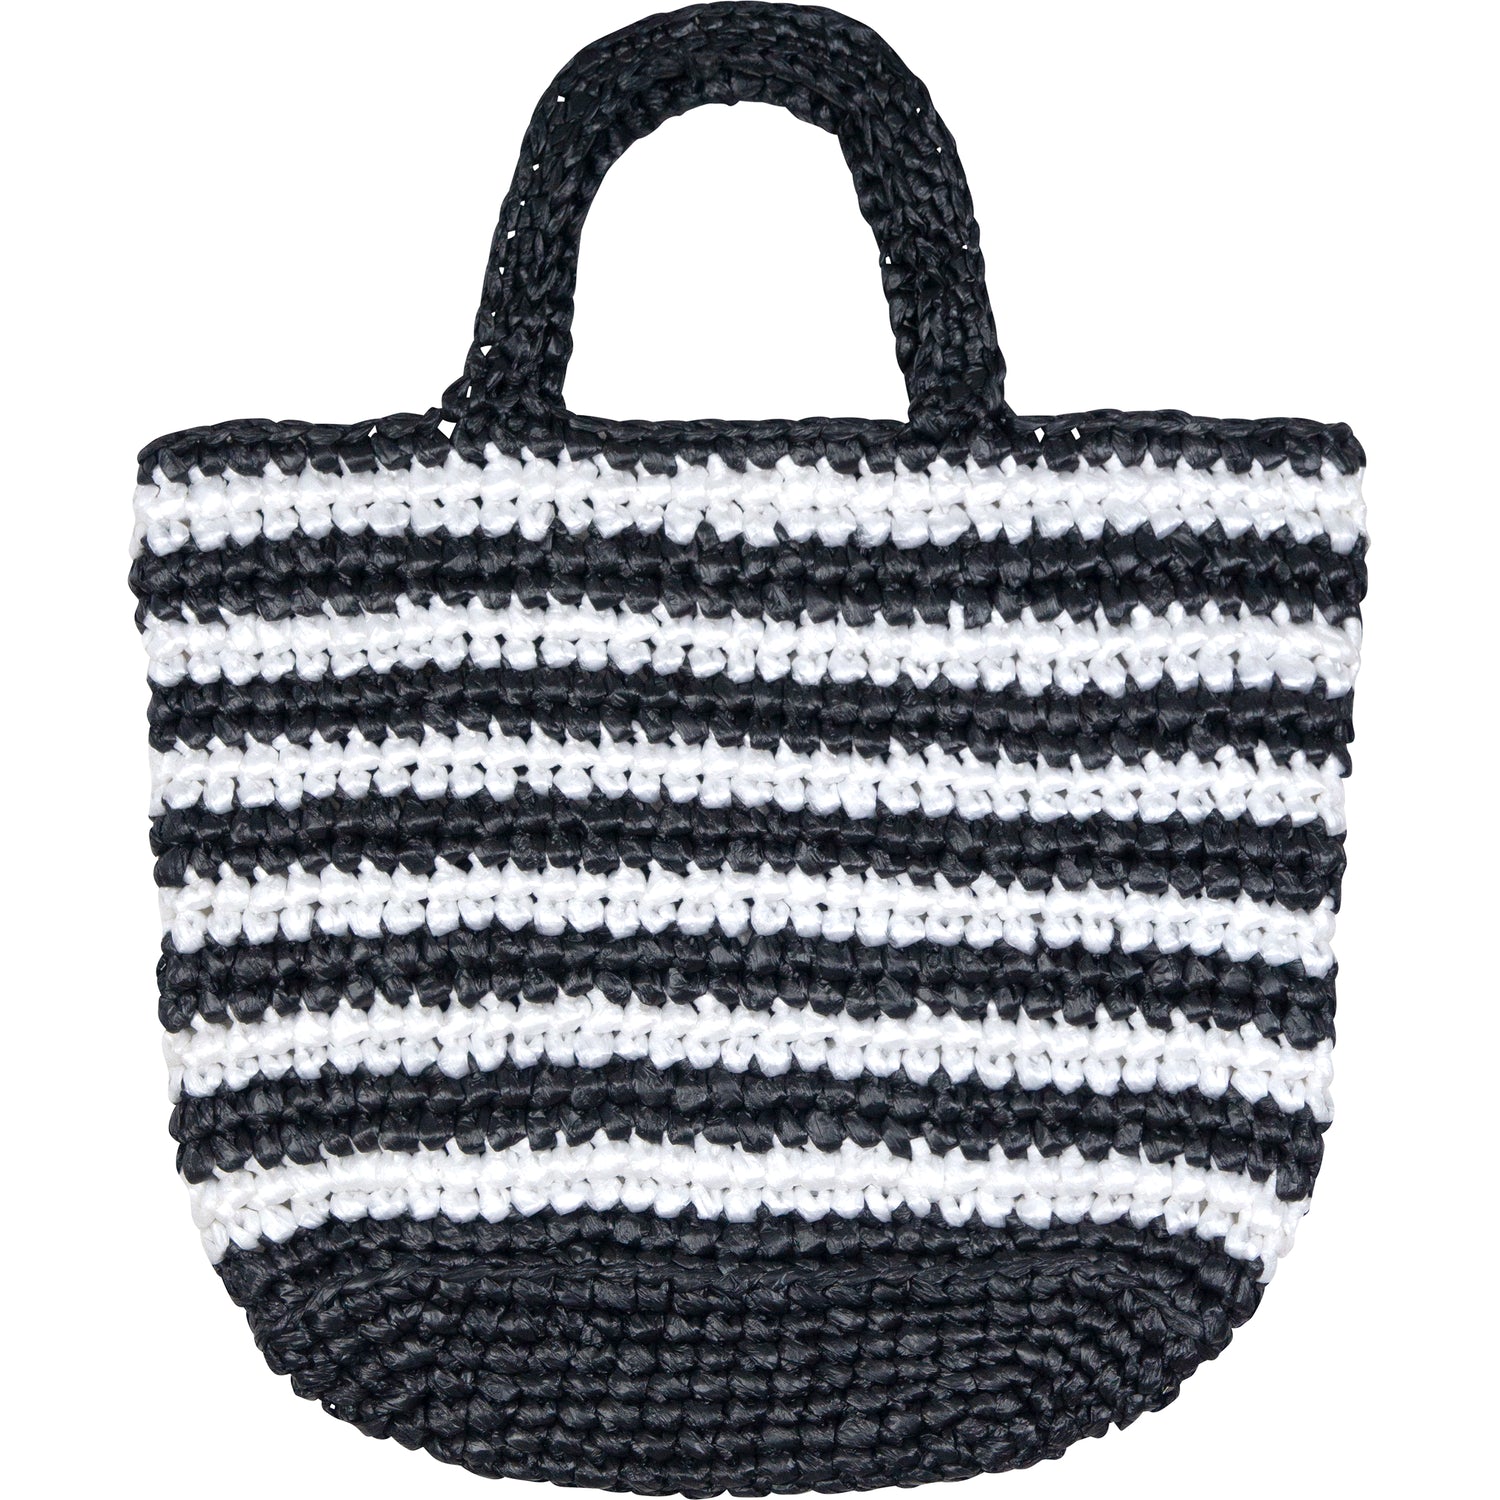 HAND WOVEN RECYCLED BEACH BAG